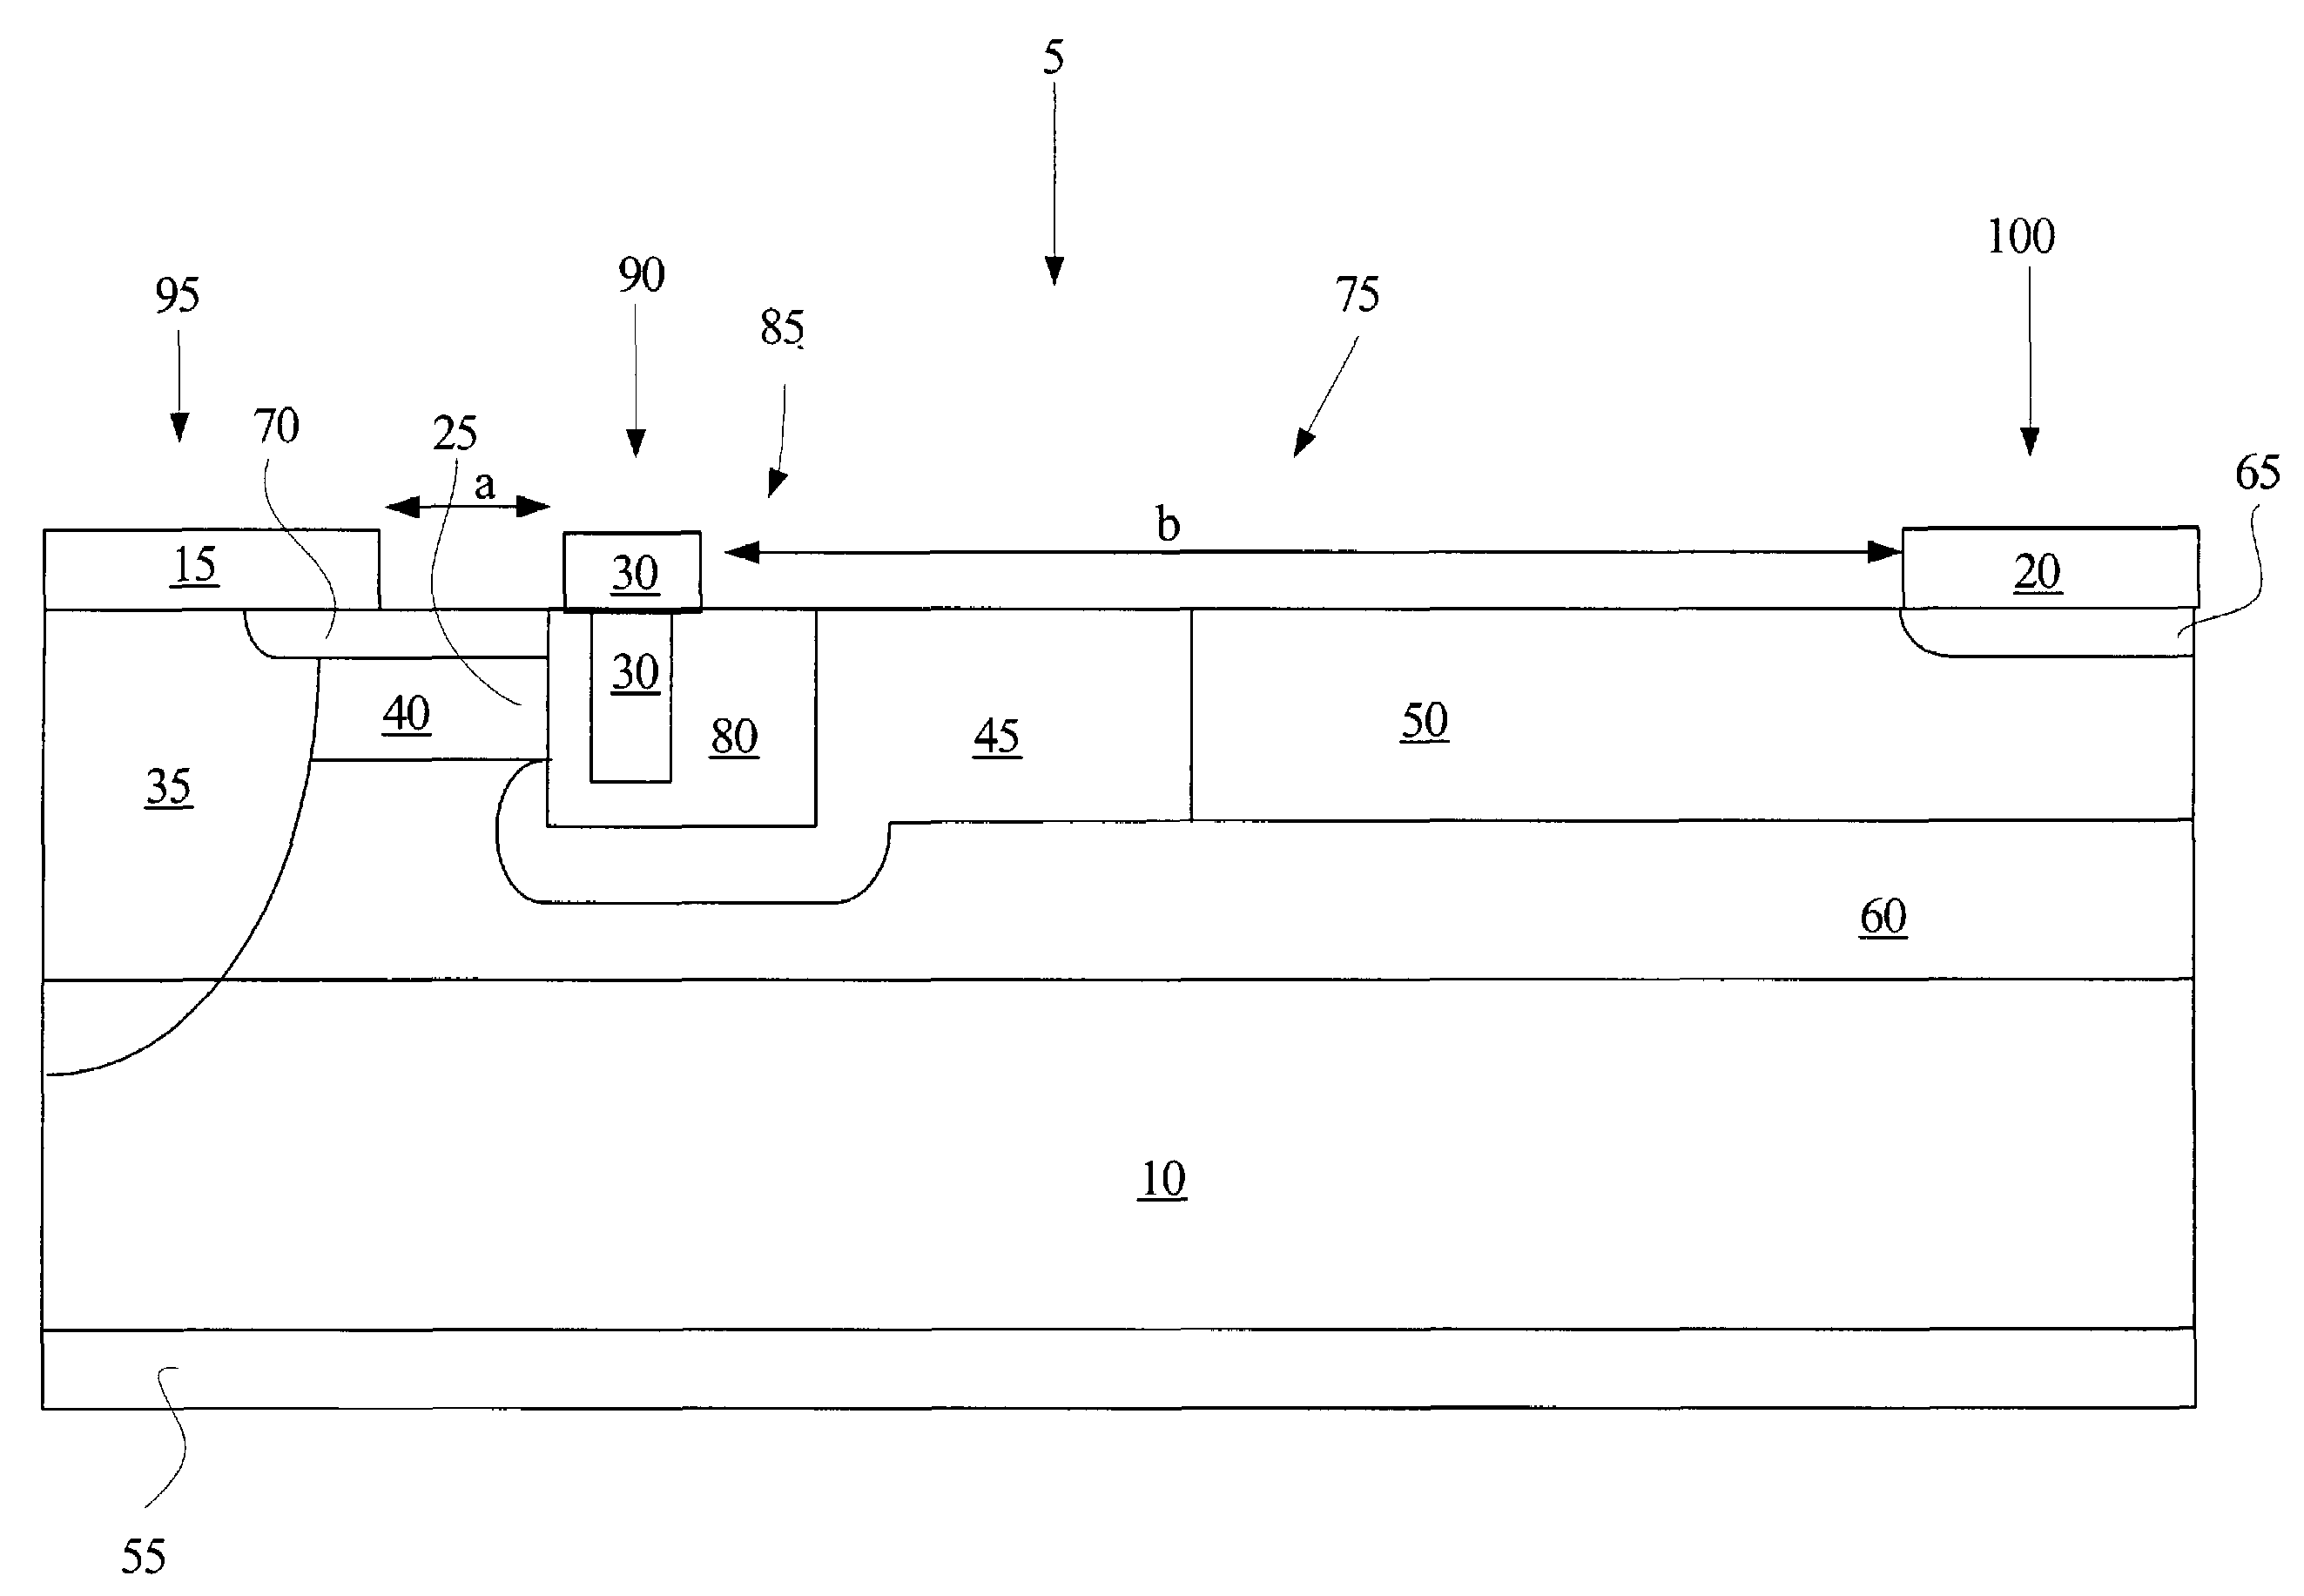 Trench gate laterally diffused MOSFET devices and methods for making such devices